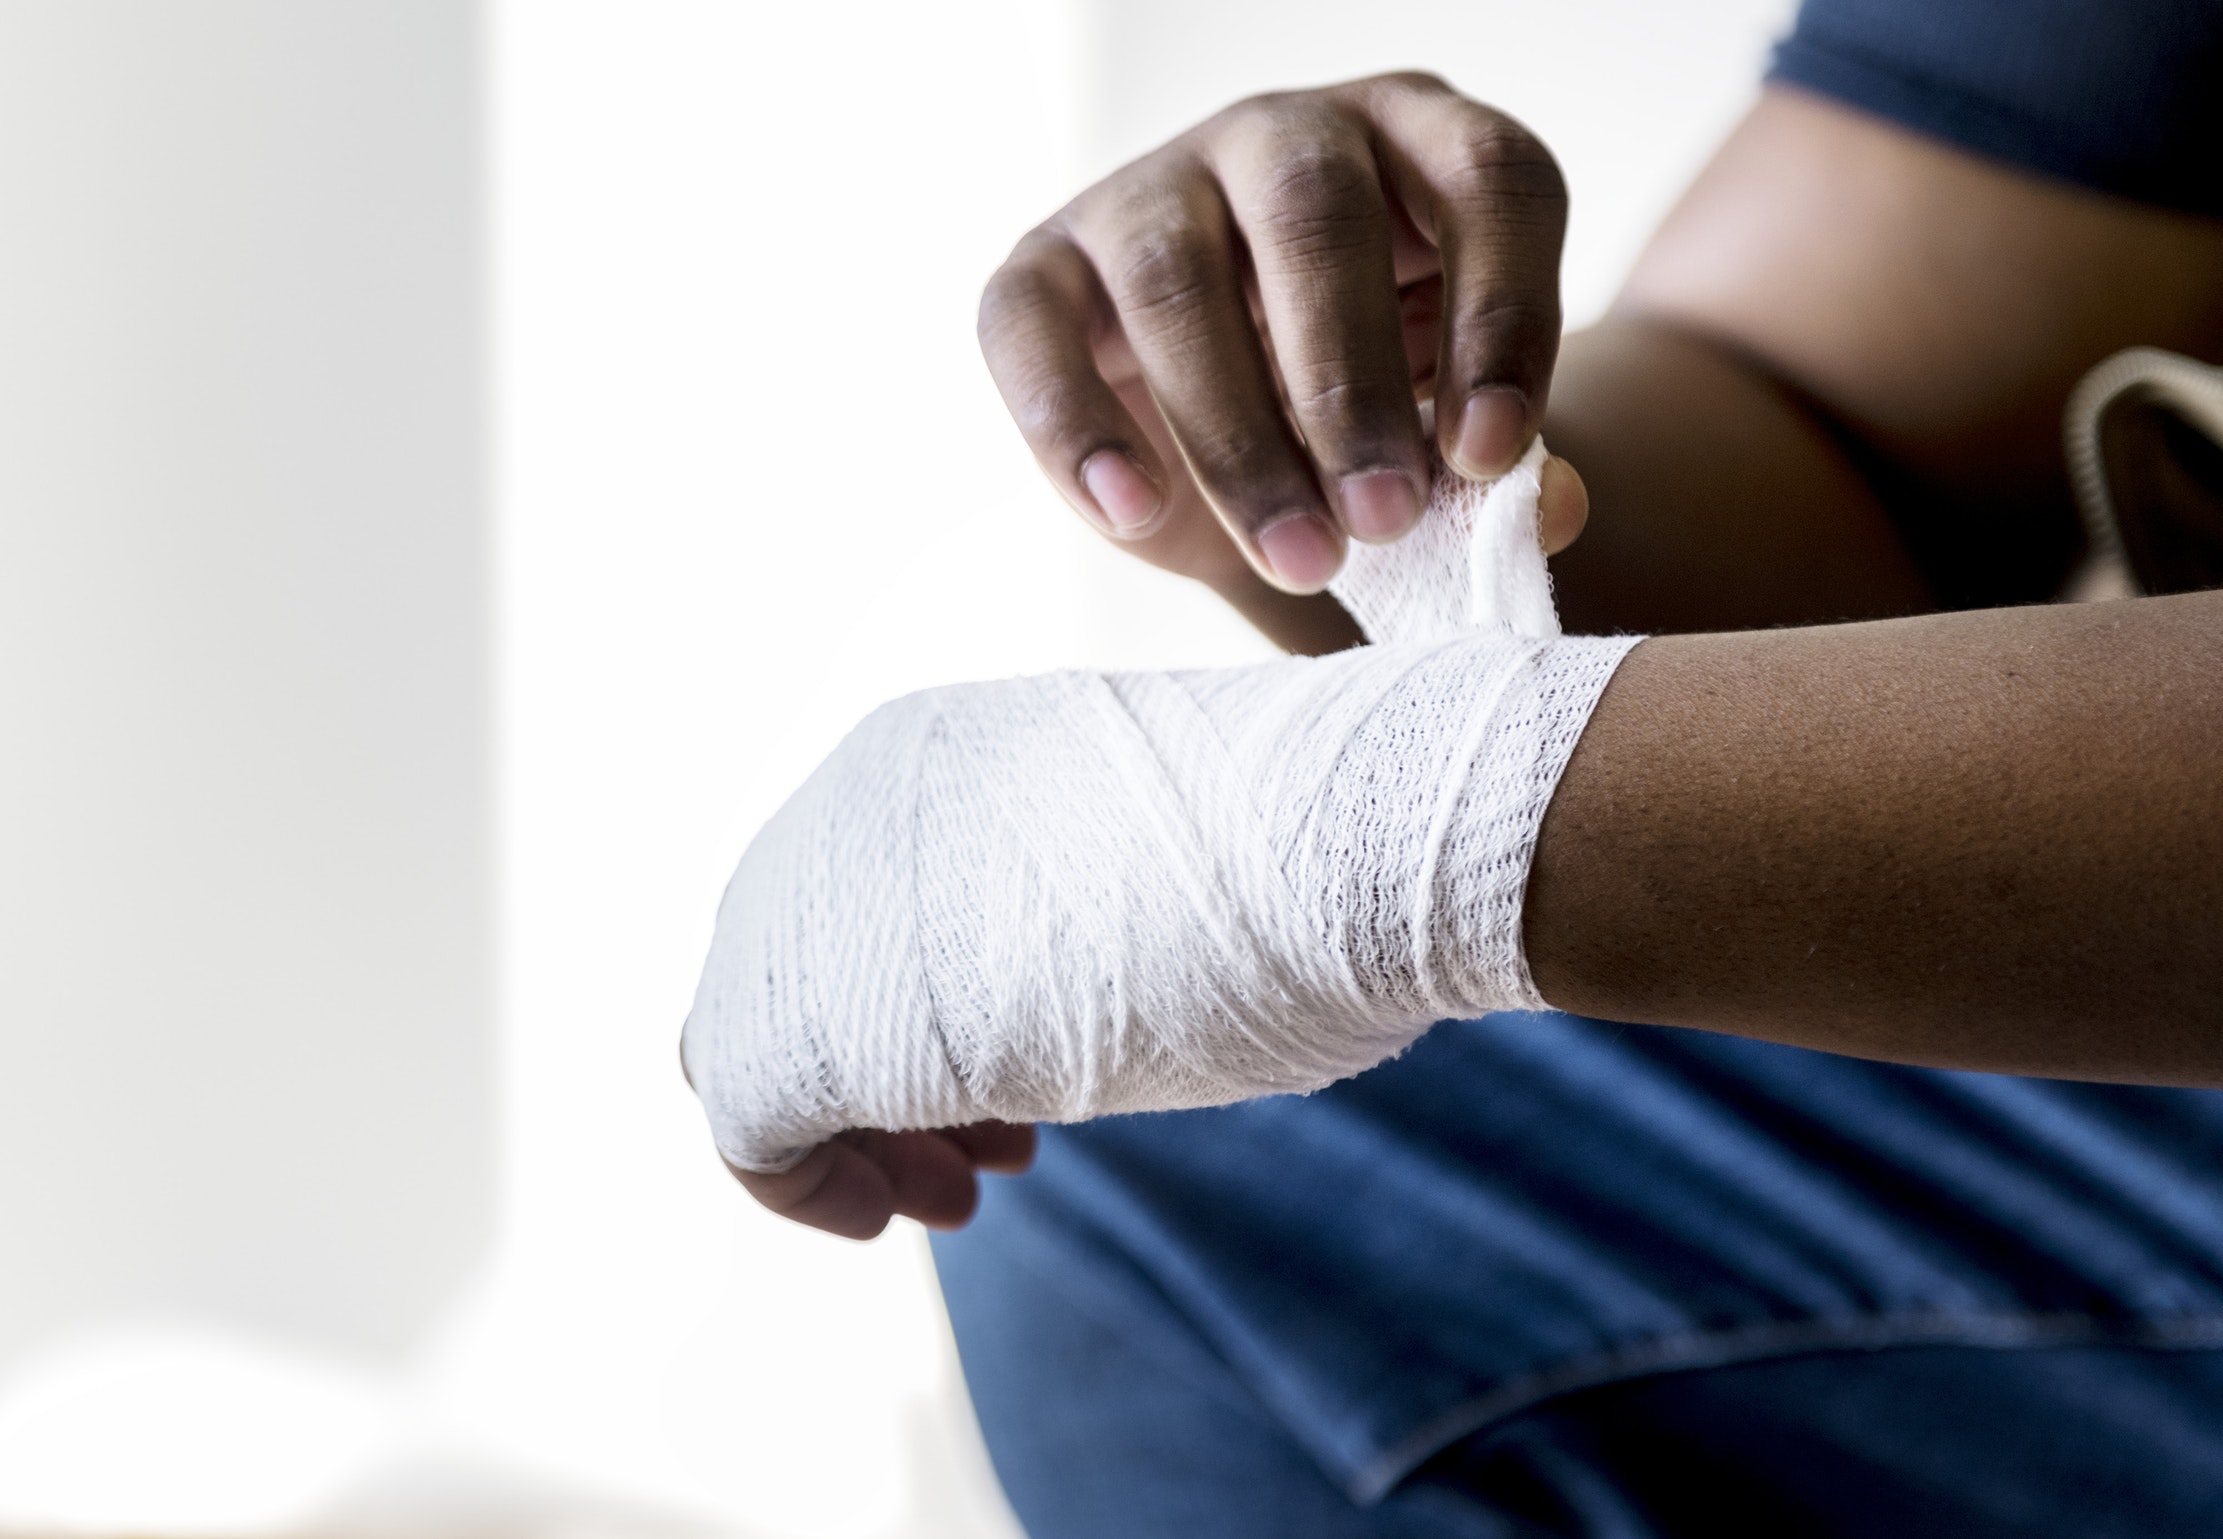 How To Prevent Overuse Injuries